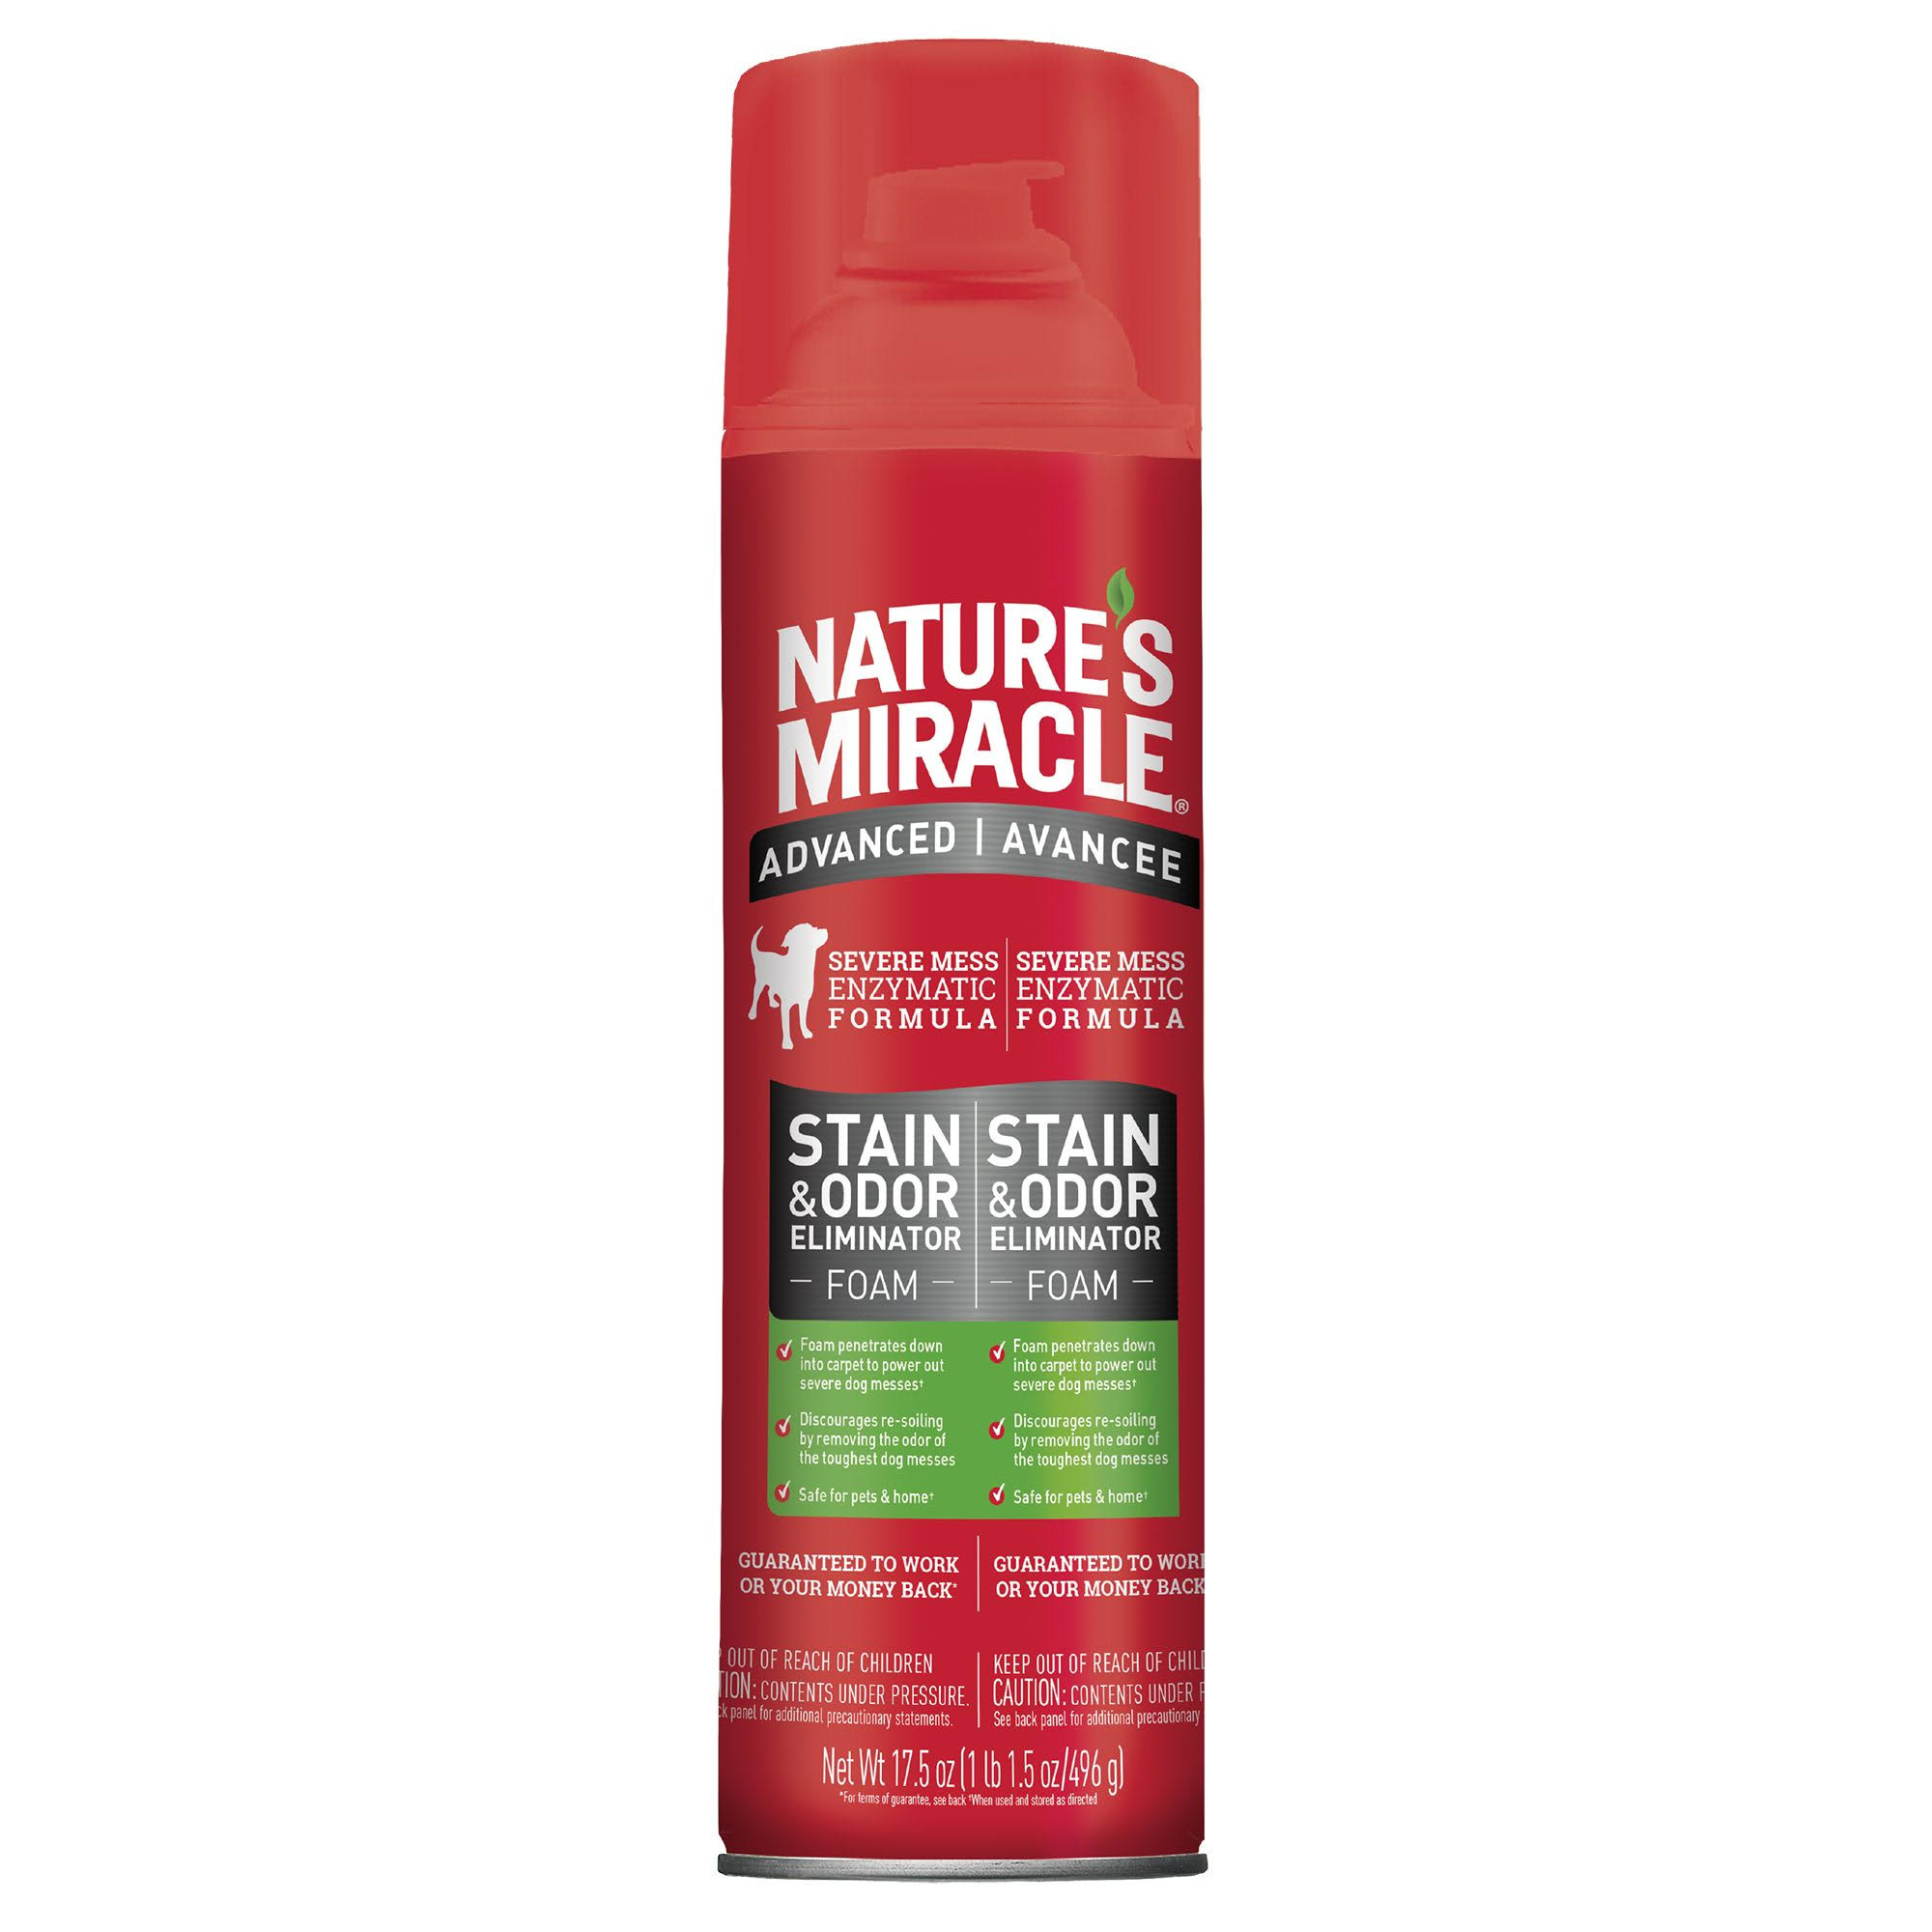 Nature's Miracle Advanced Dog Stain and Odor Foam, Size: 17.5 fl oz | PetSmart